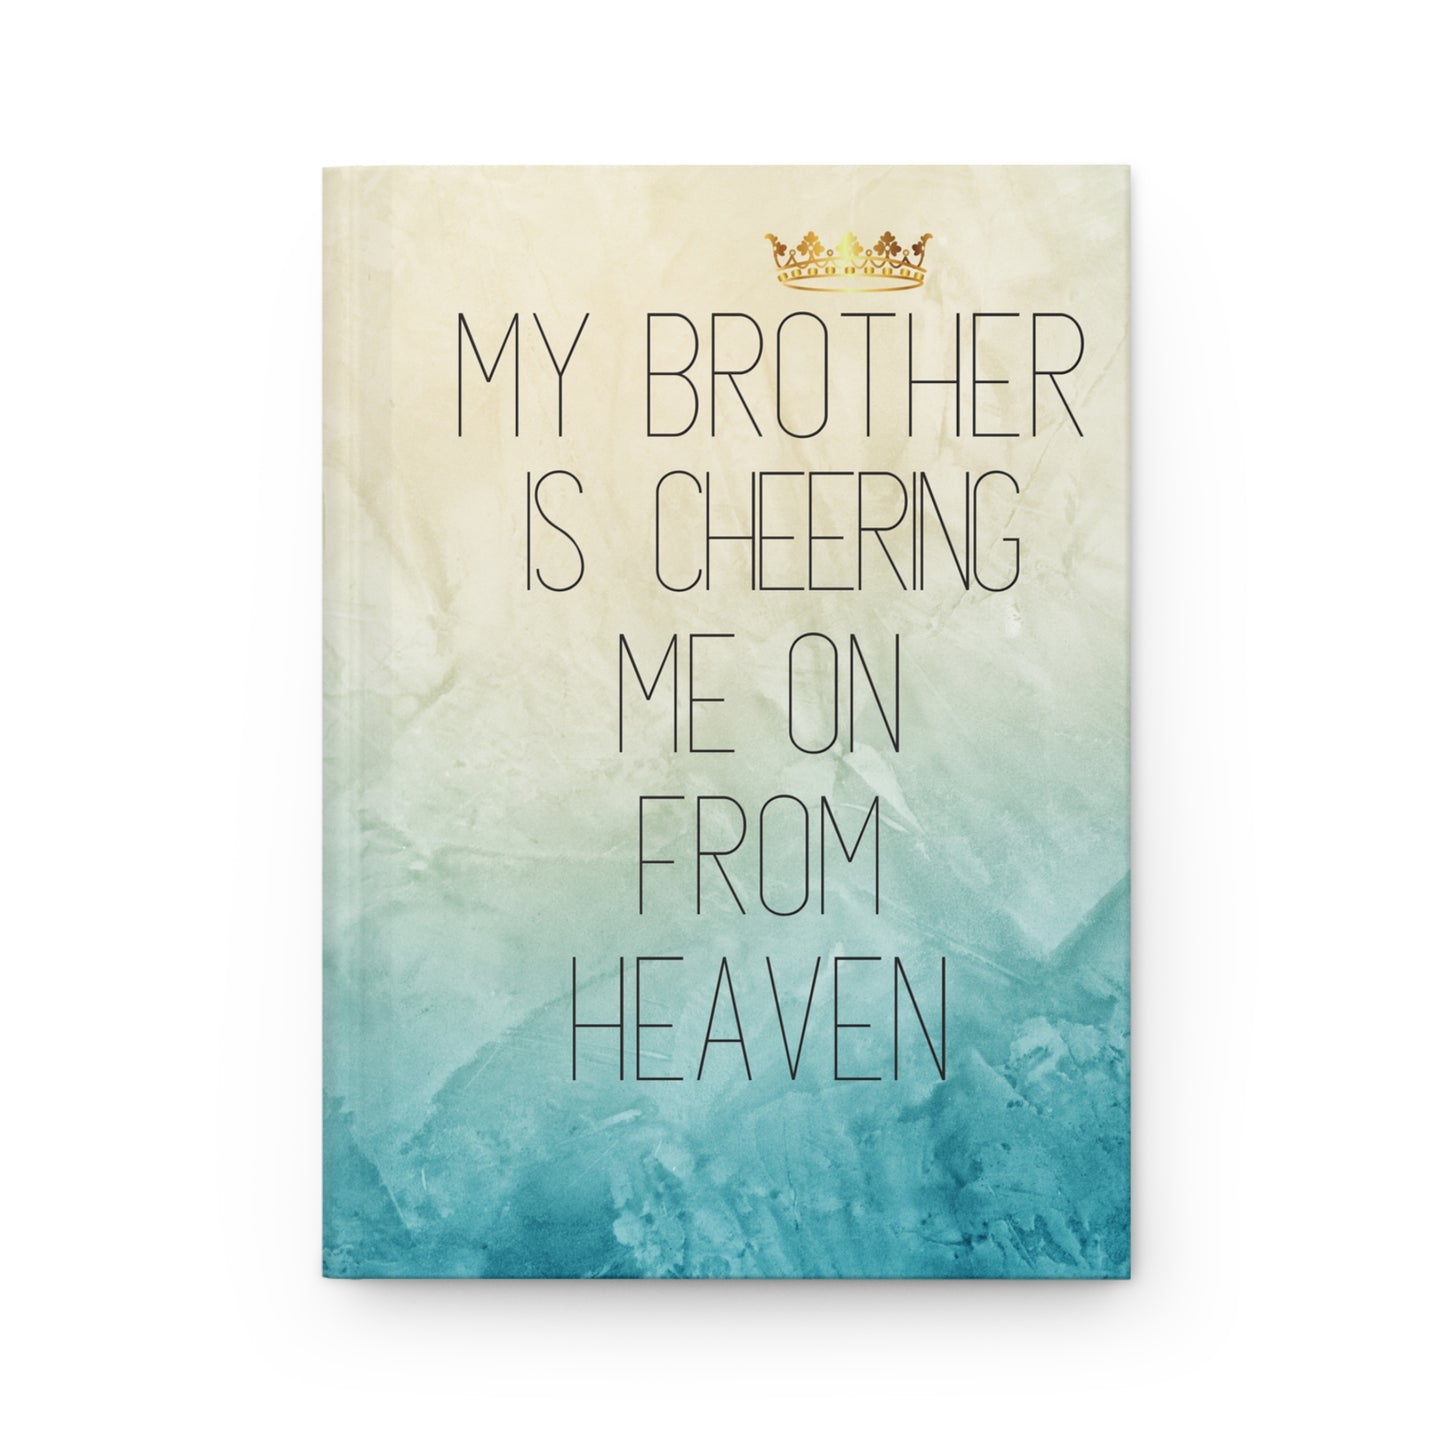 Grief Journal for Loss of Brother, Cheering Me On From Heaven